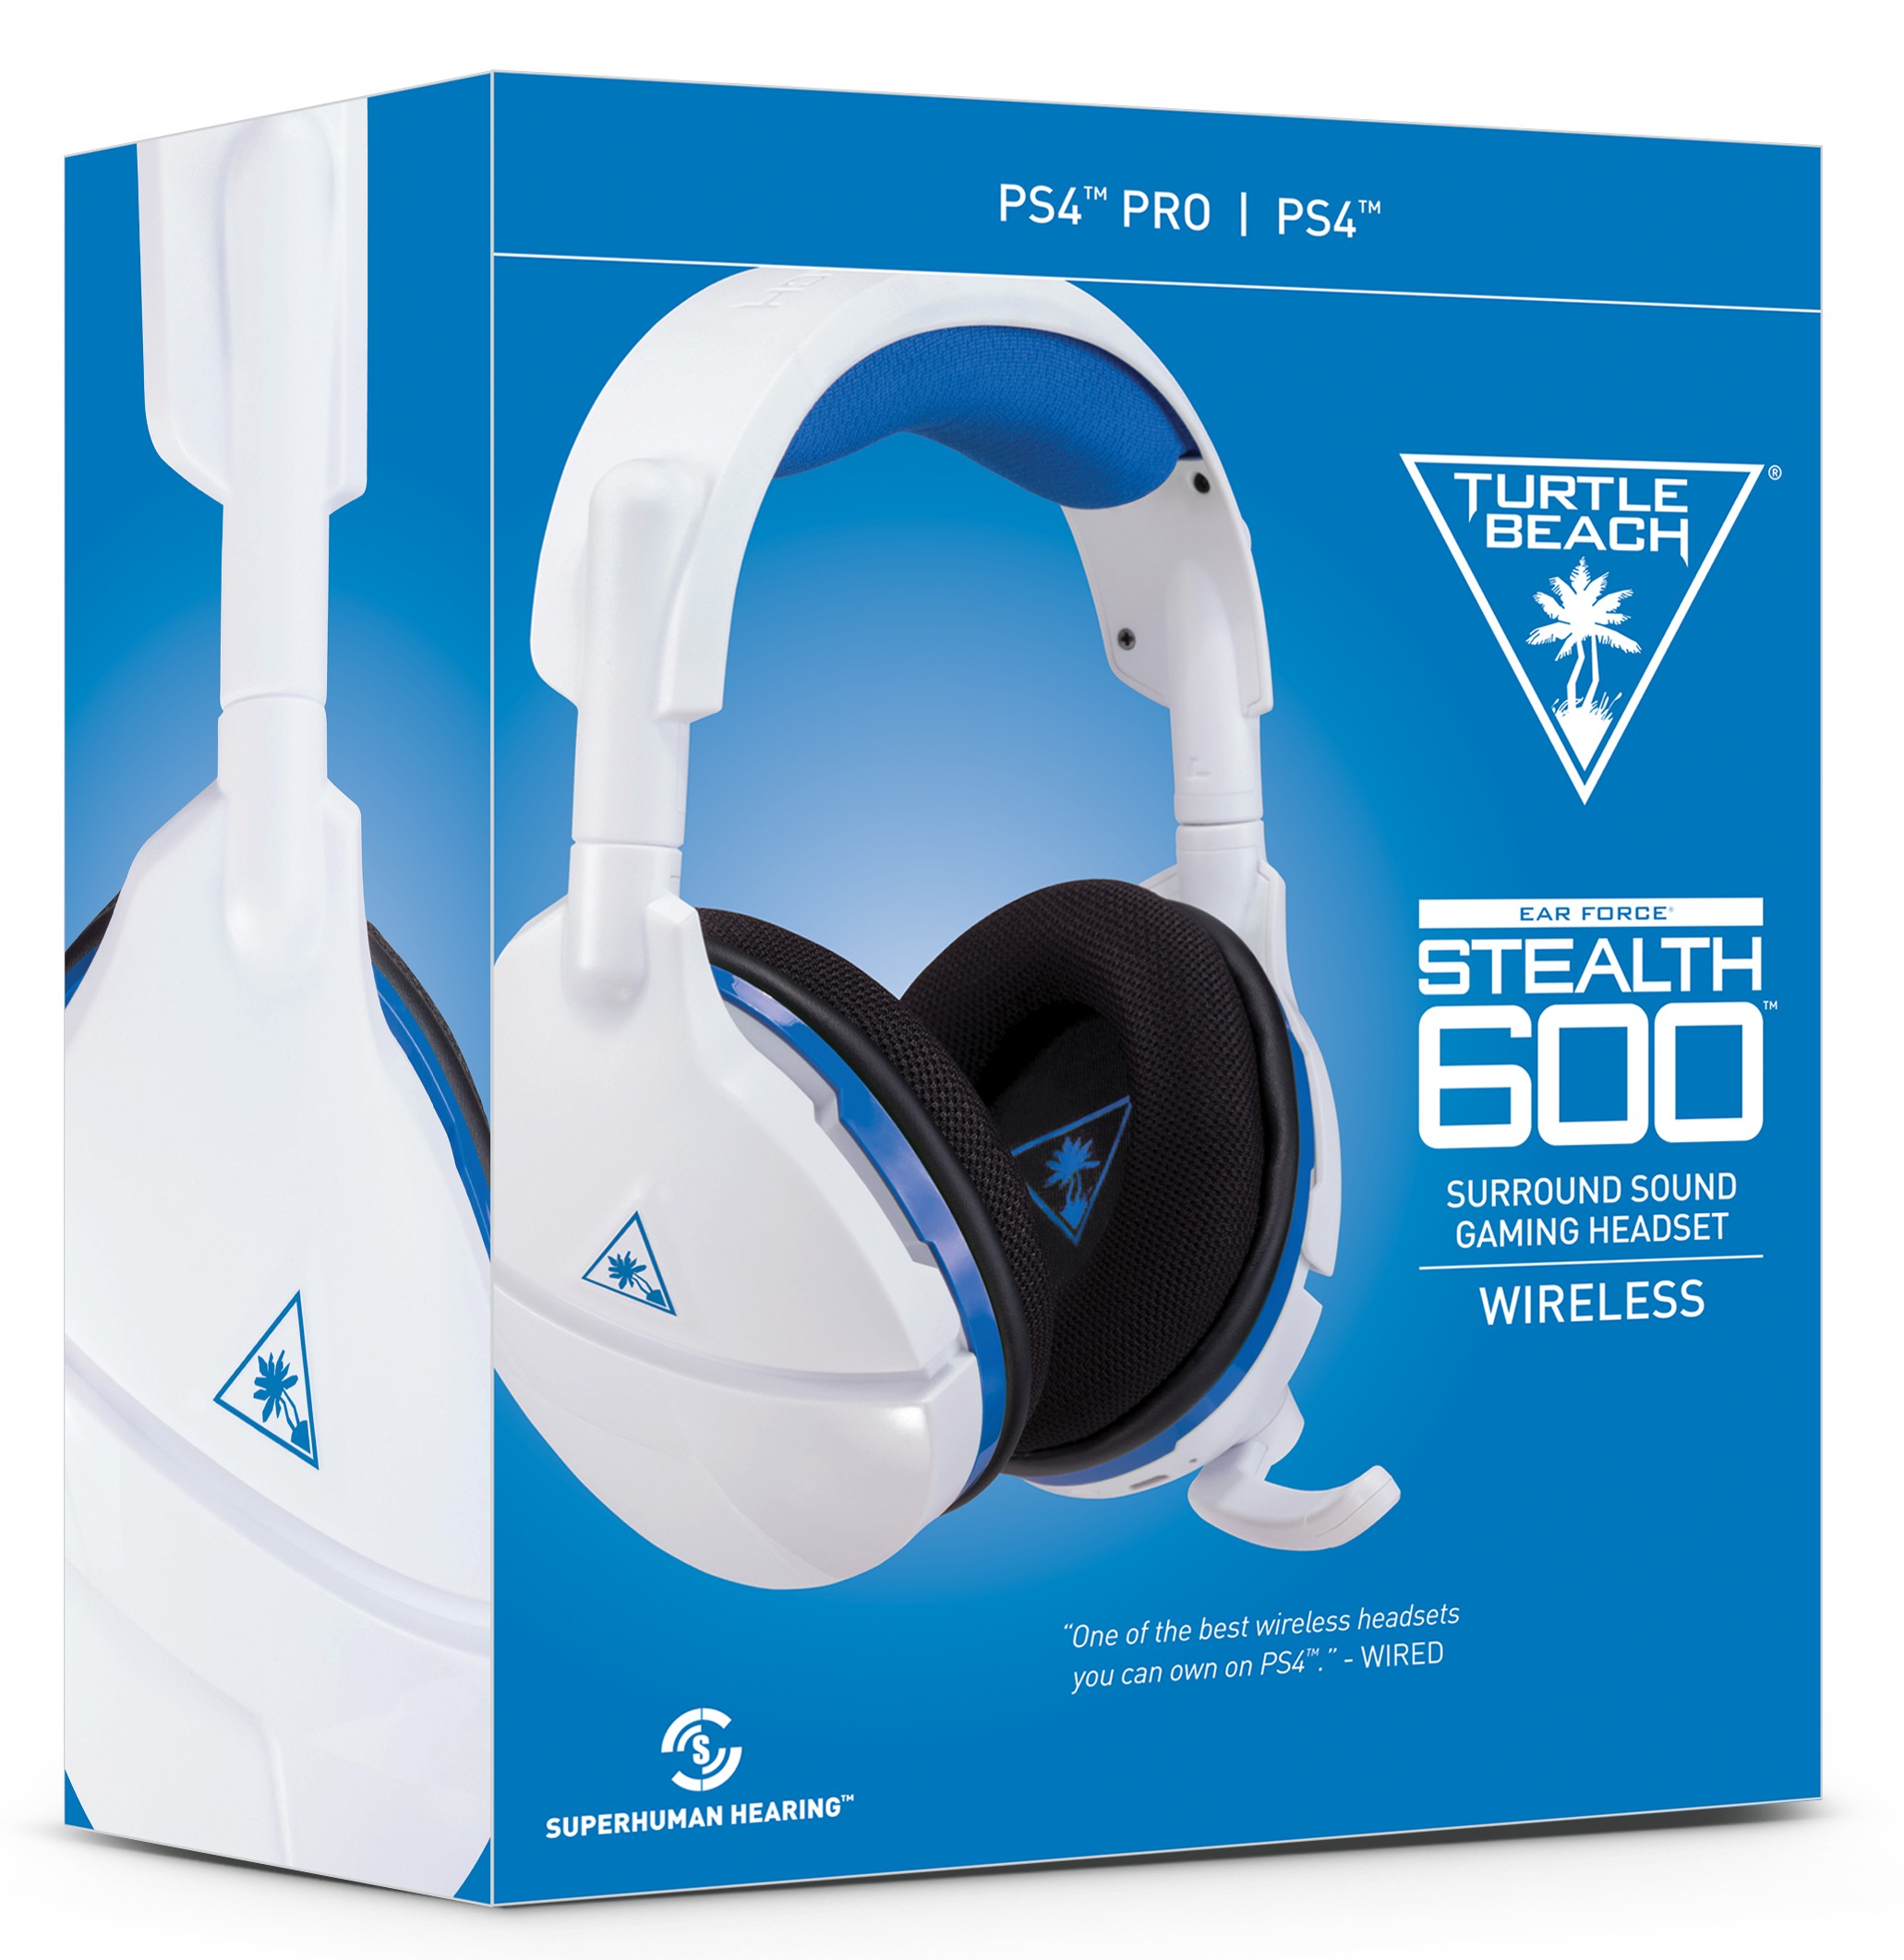 Stealth 600 PlayStation 4 White (Turtle Beach)